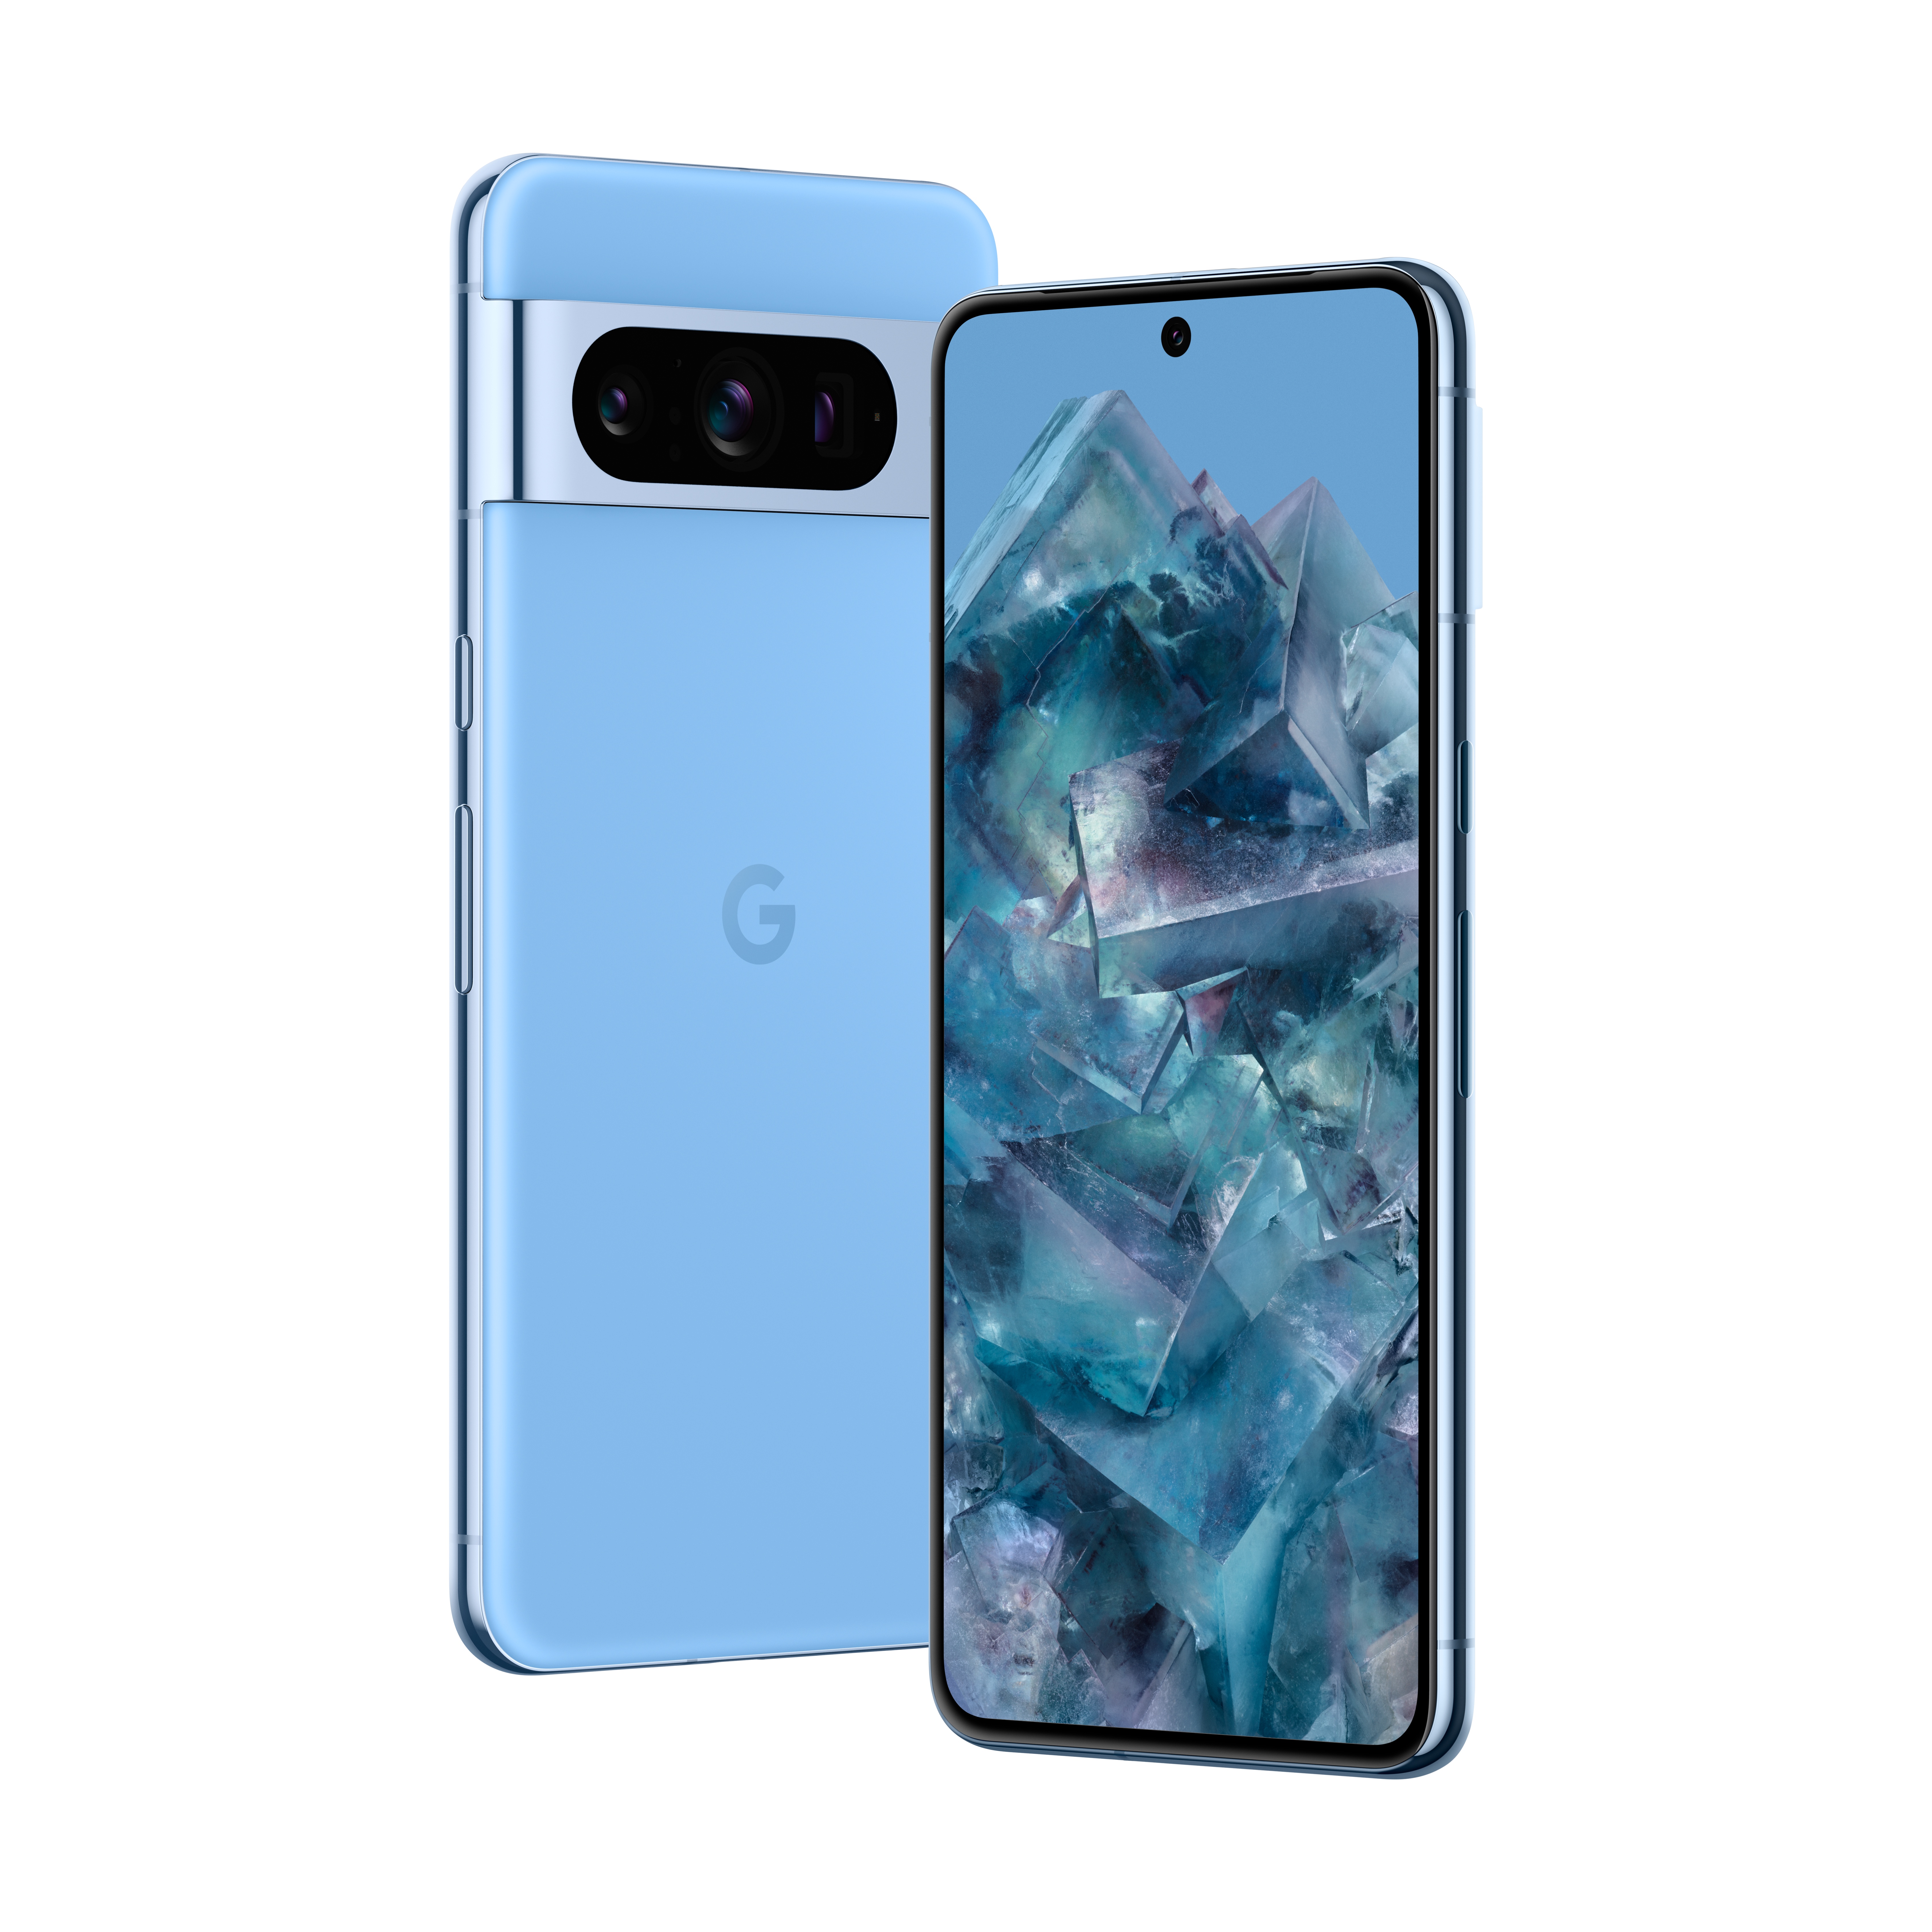 Pixel 8 Pro in Bay front and back square render